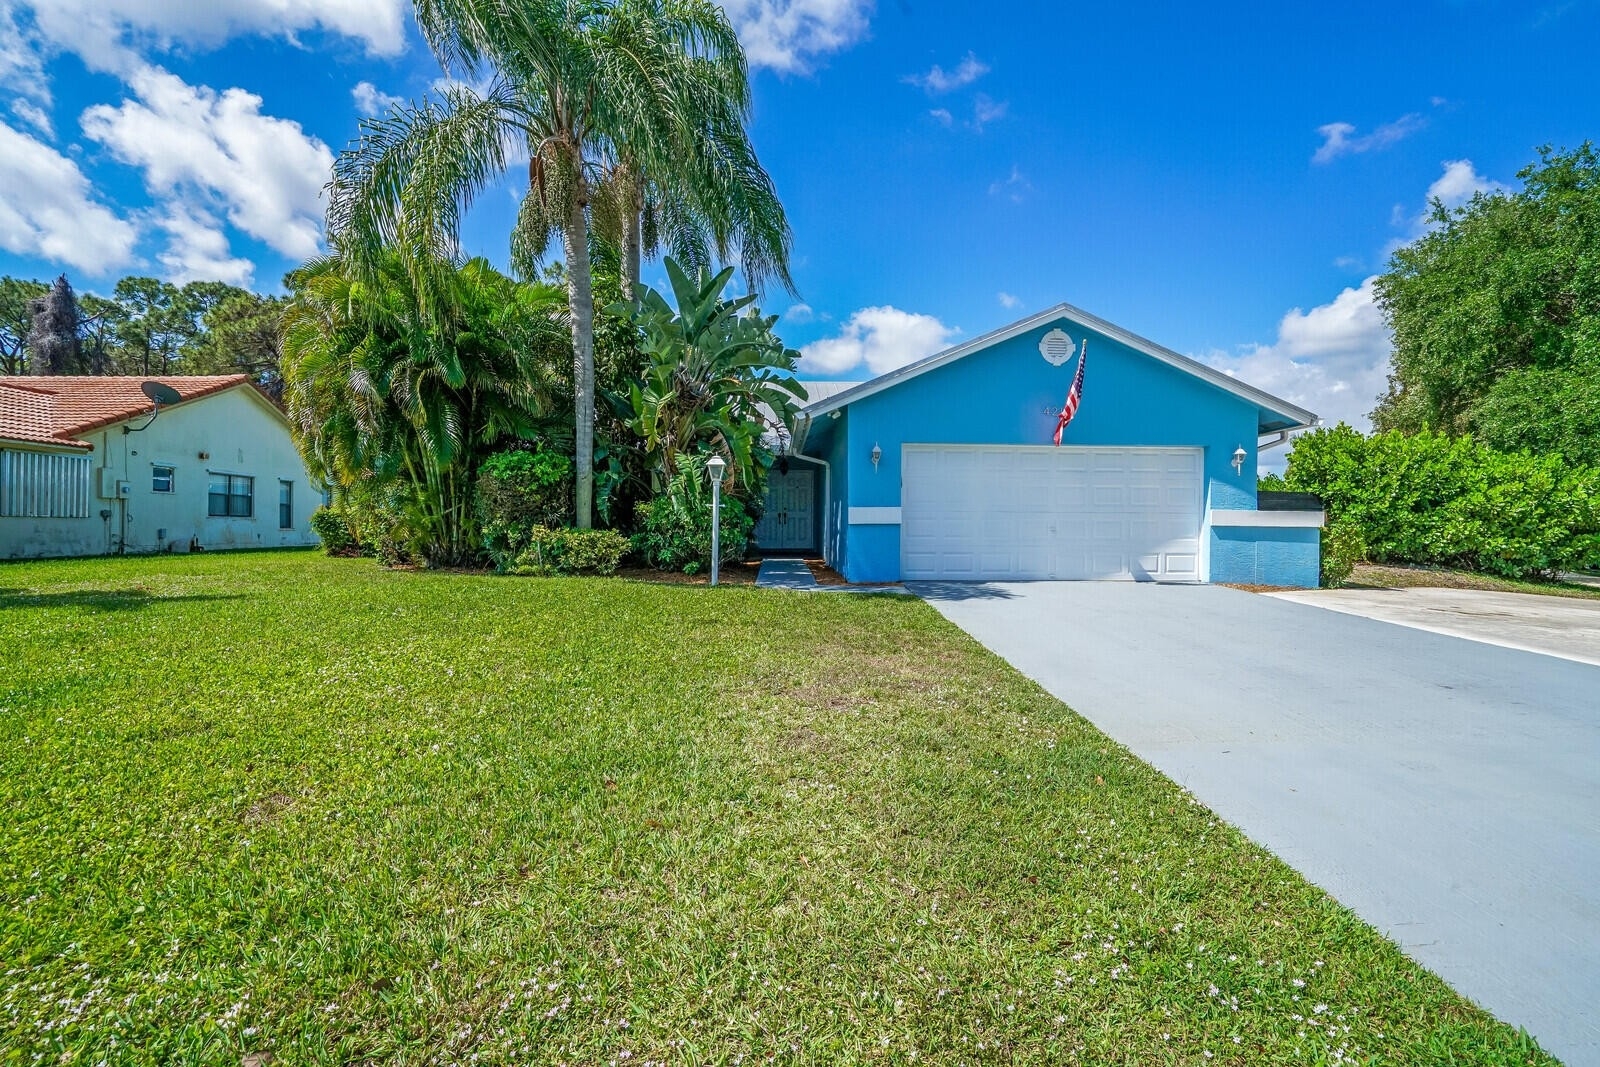 Single Family Home for Sale at Delray Beach, FL 33445